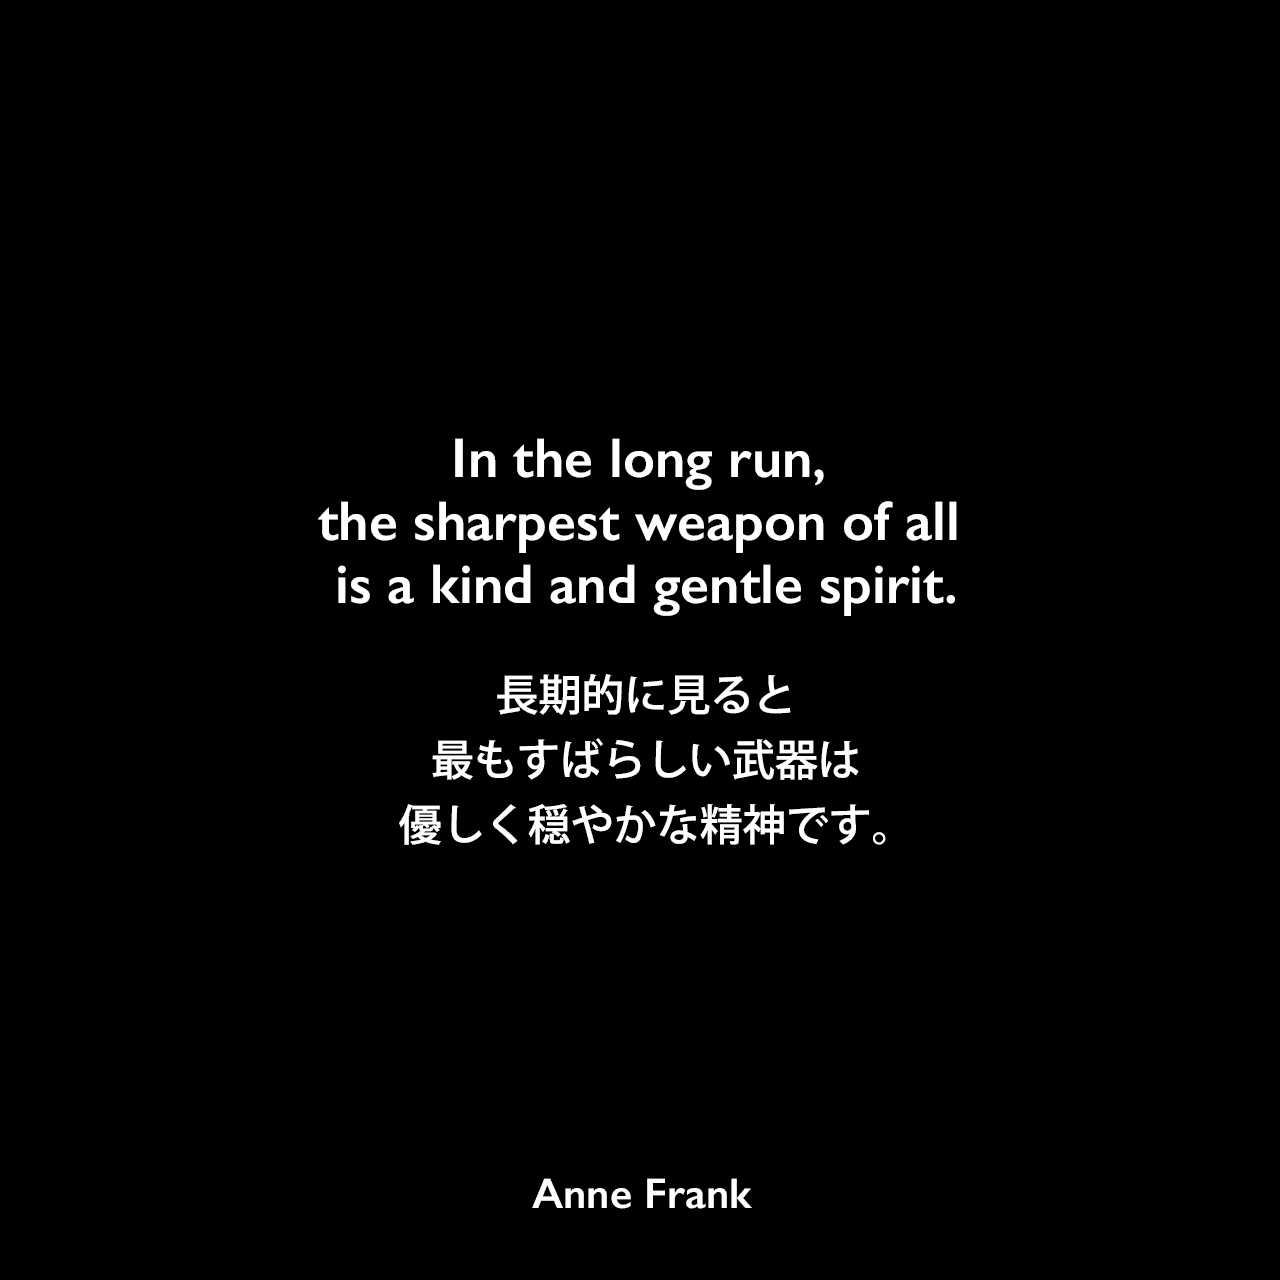 In the long run, the sharpest weapon of all is a kind and gentle spirit.長期的に見ると、最もすばらしい武器は優しく穏やかな精神です。Anne Frank